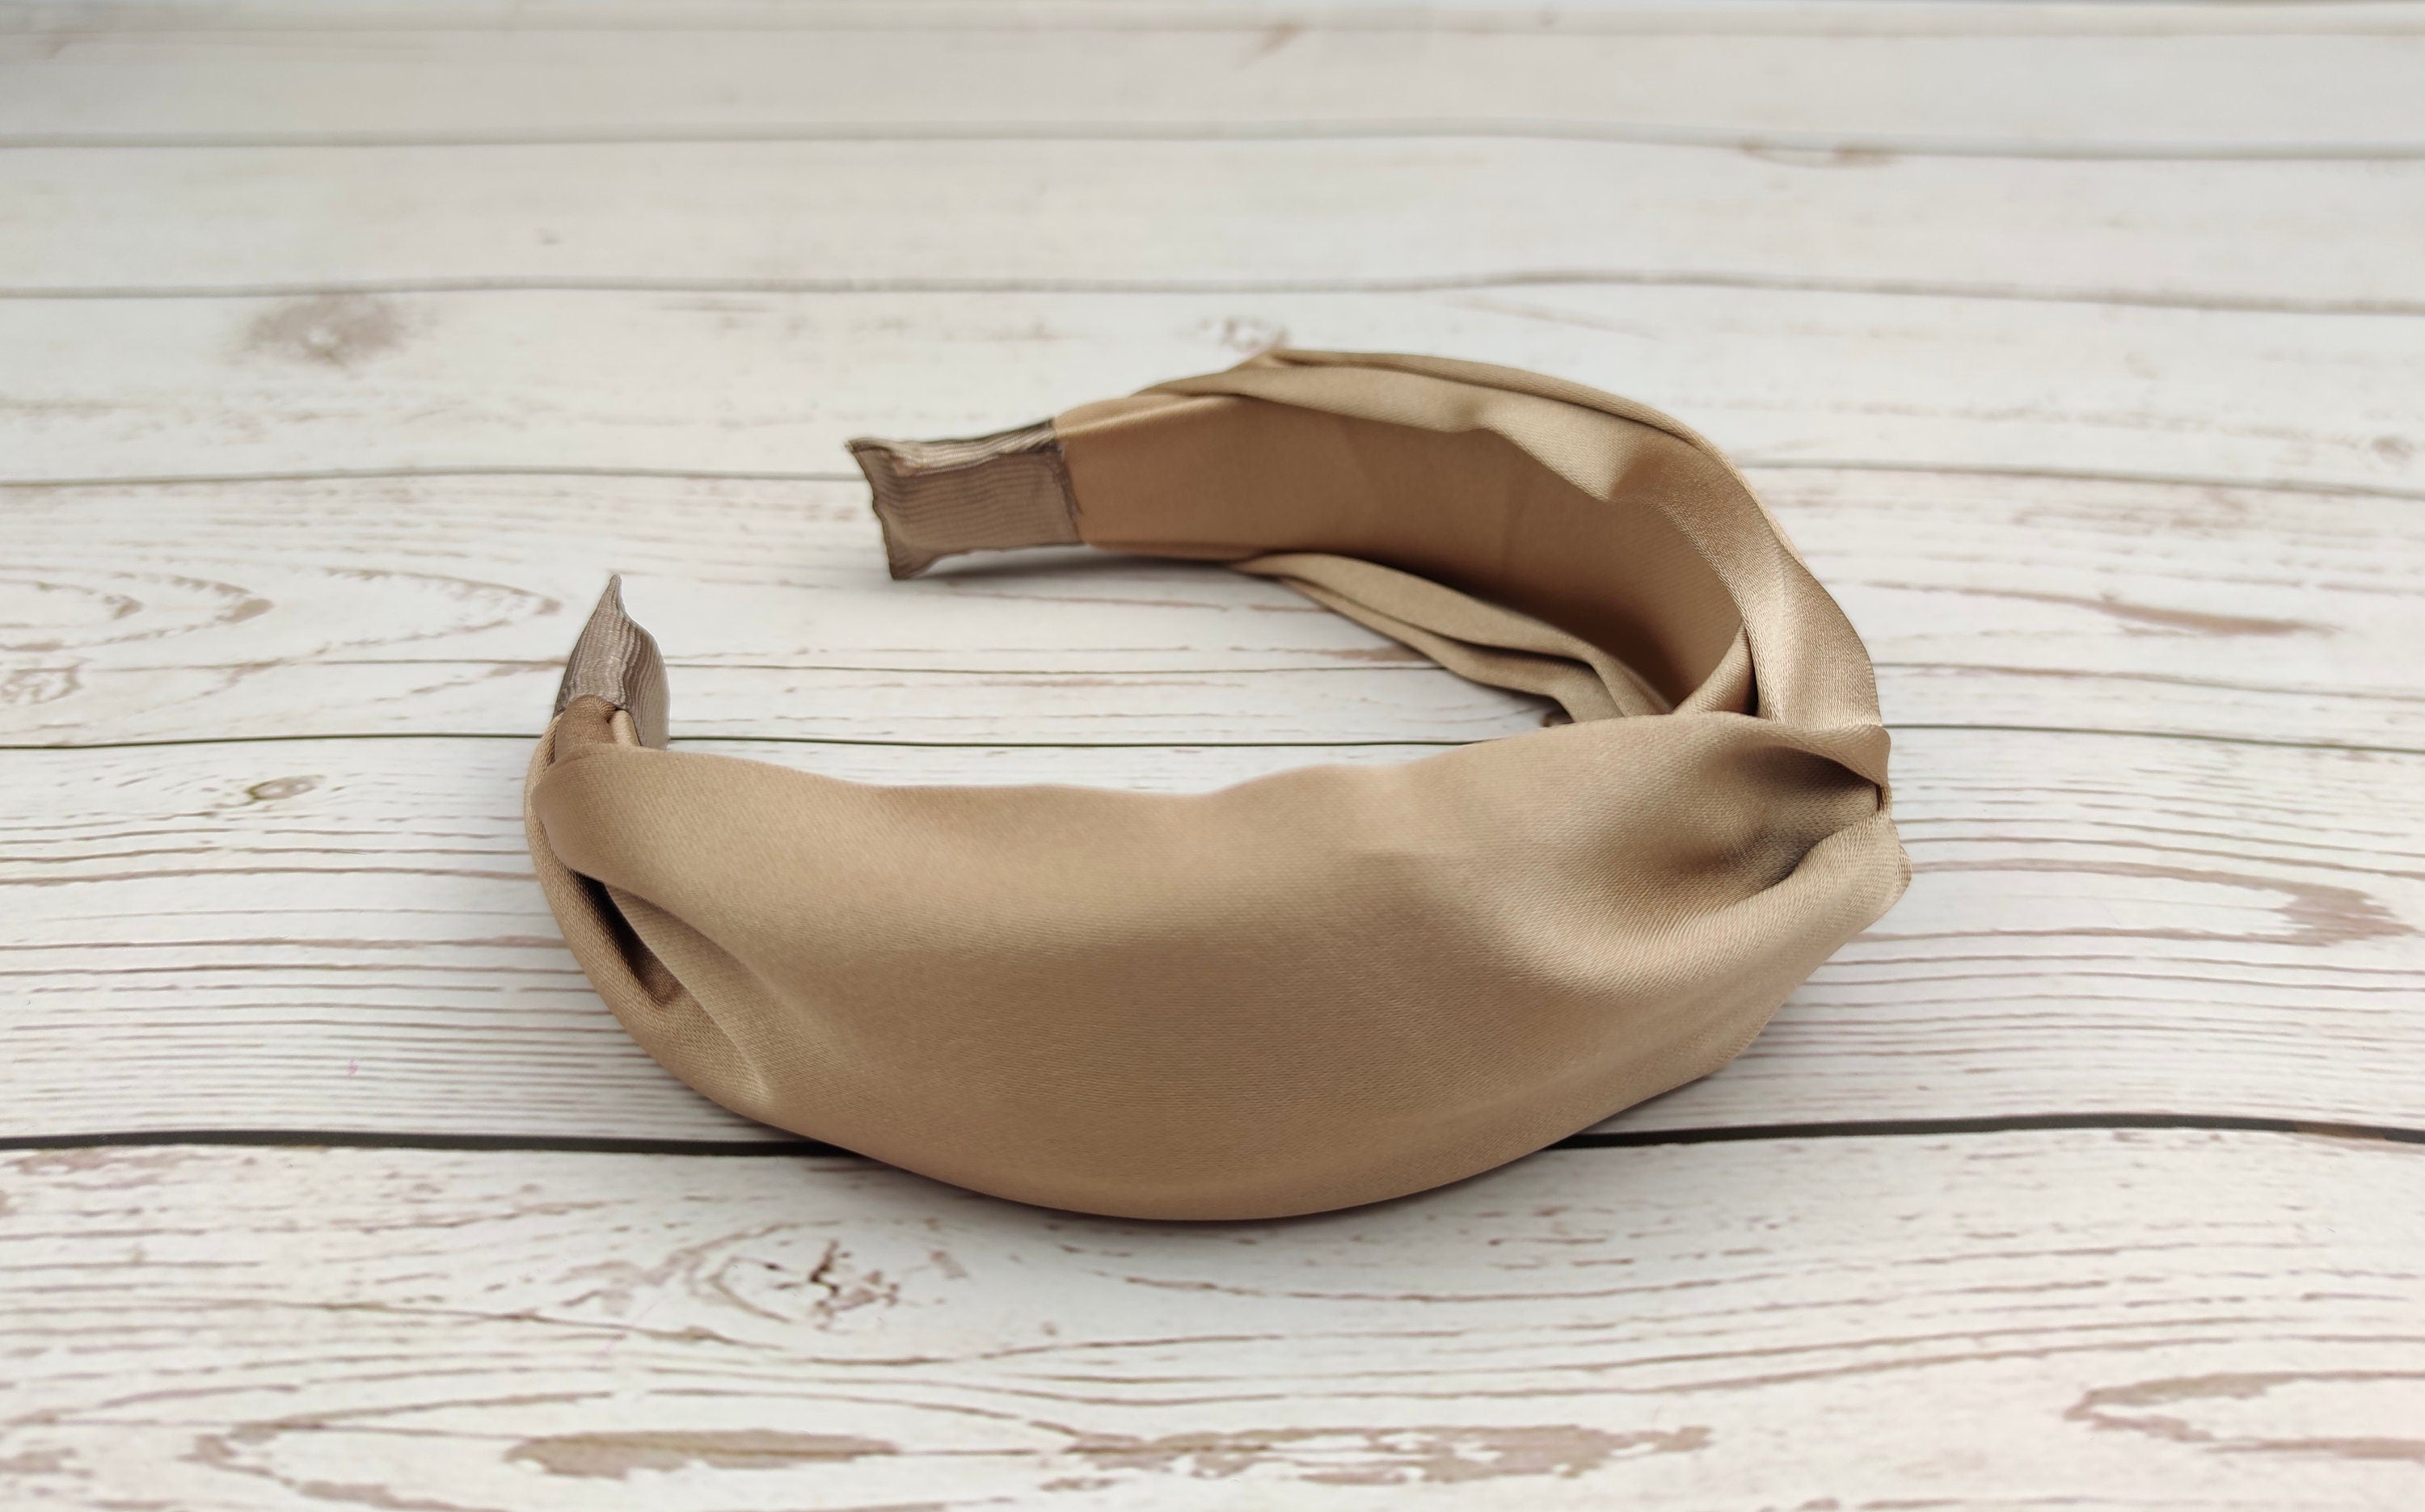 Elevate your summer style with our Cream-Colored Satin Knotted Headband. This headband features a chic knot design and a stunning beige color, perfect for any outfit. The soft and comfortable satin material is perfect for all-day wear.